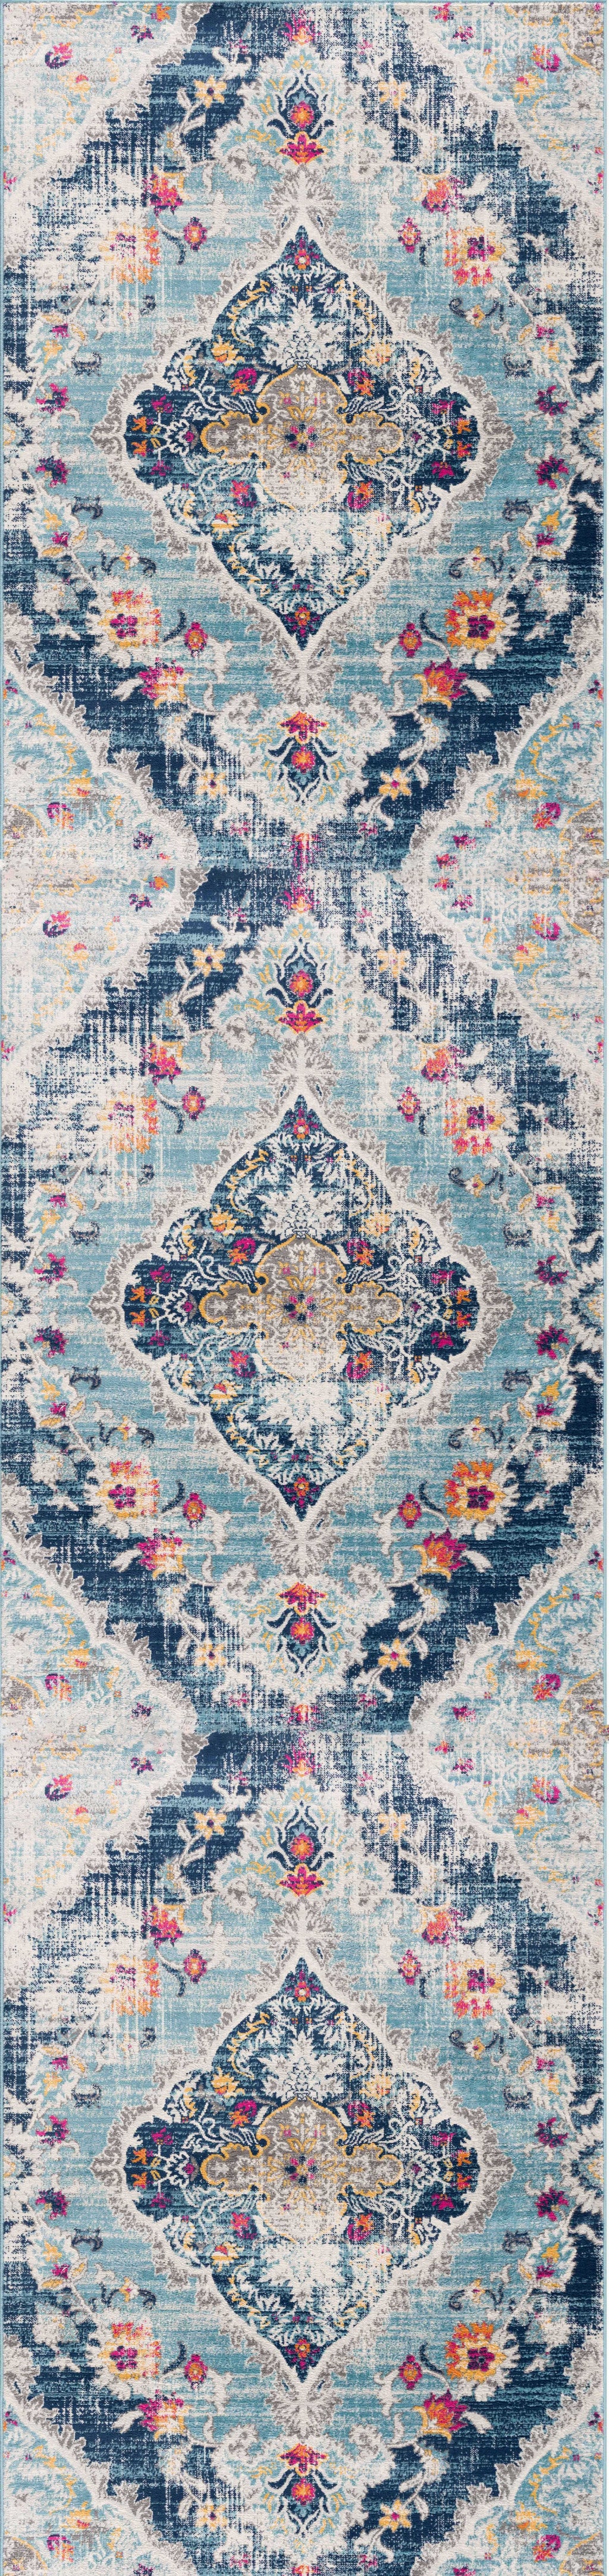 6' x 9' Blue and Ivory Medallion Area Rug